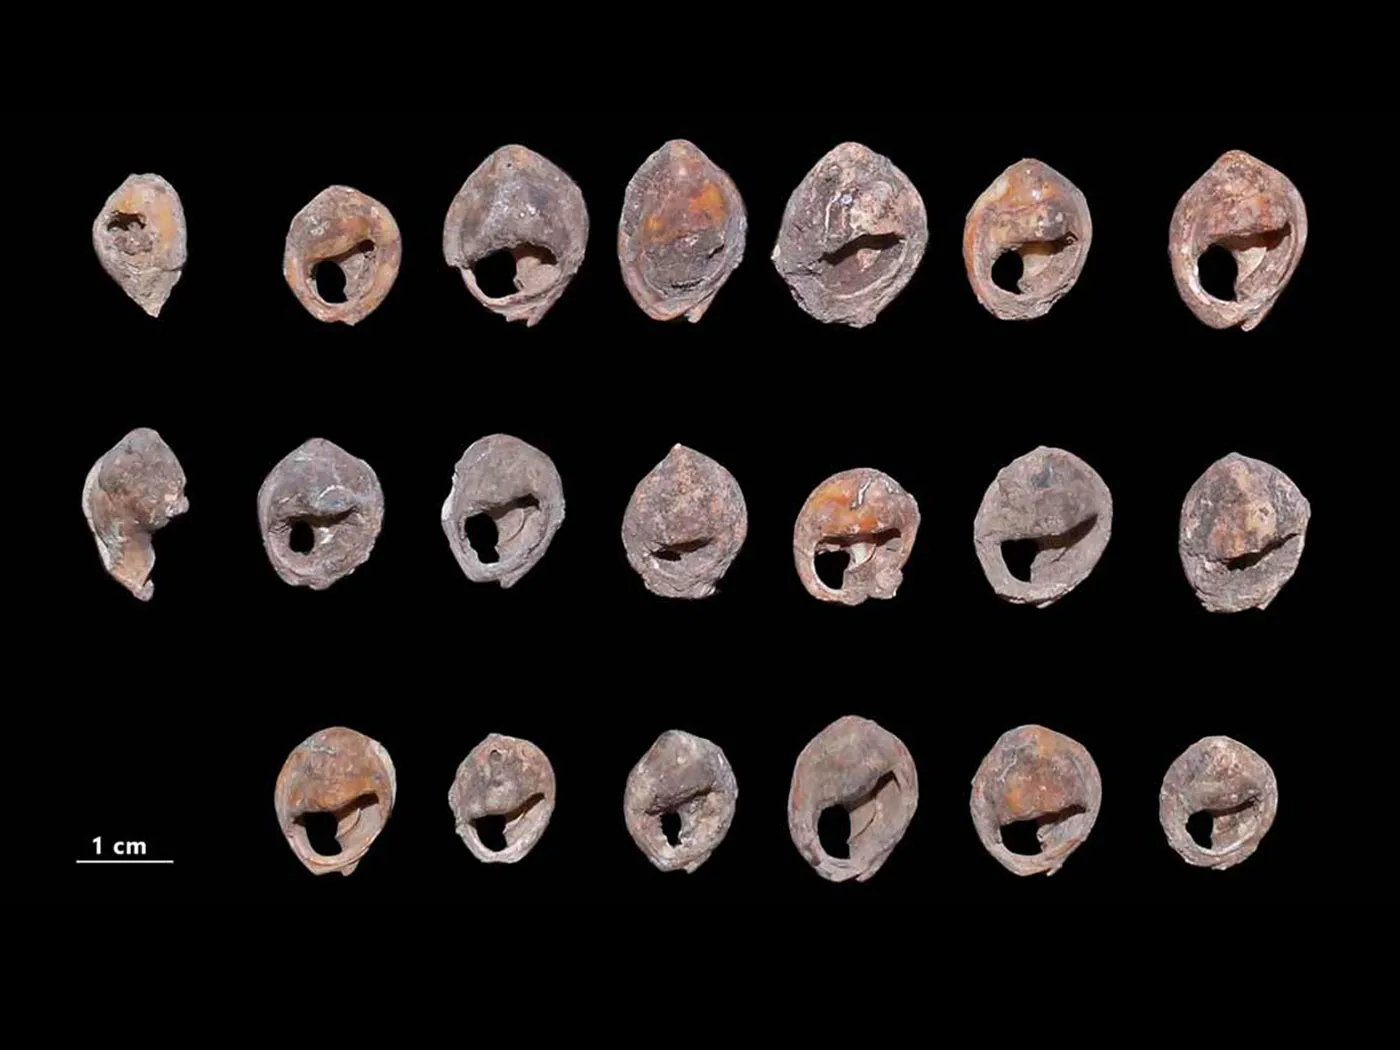 Are These Snail Shells the World's Oldest Known Beads?